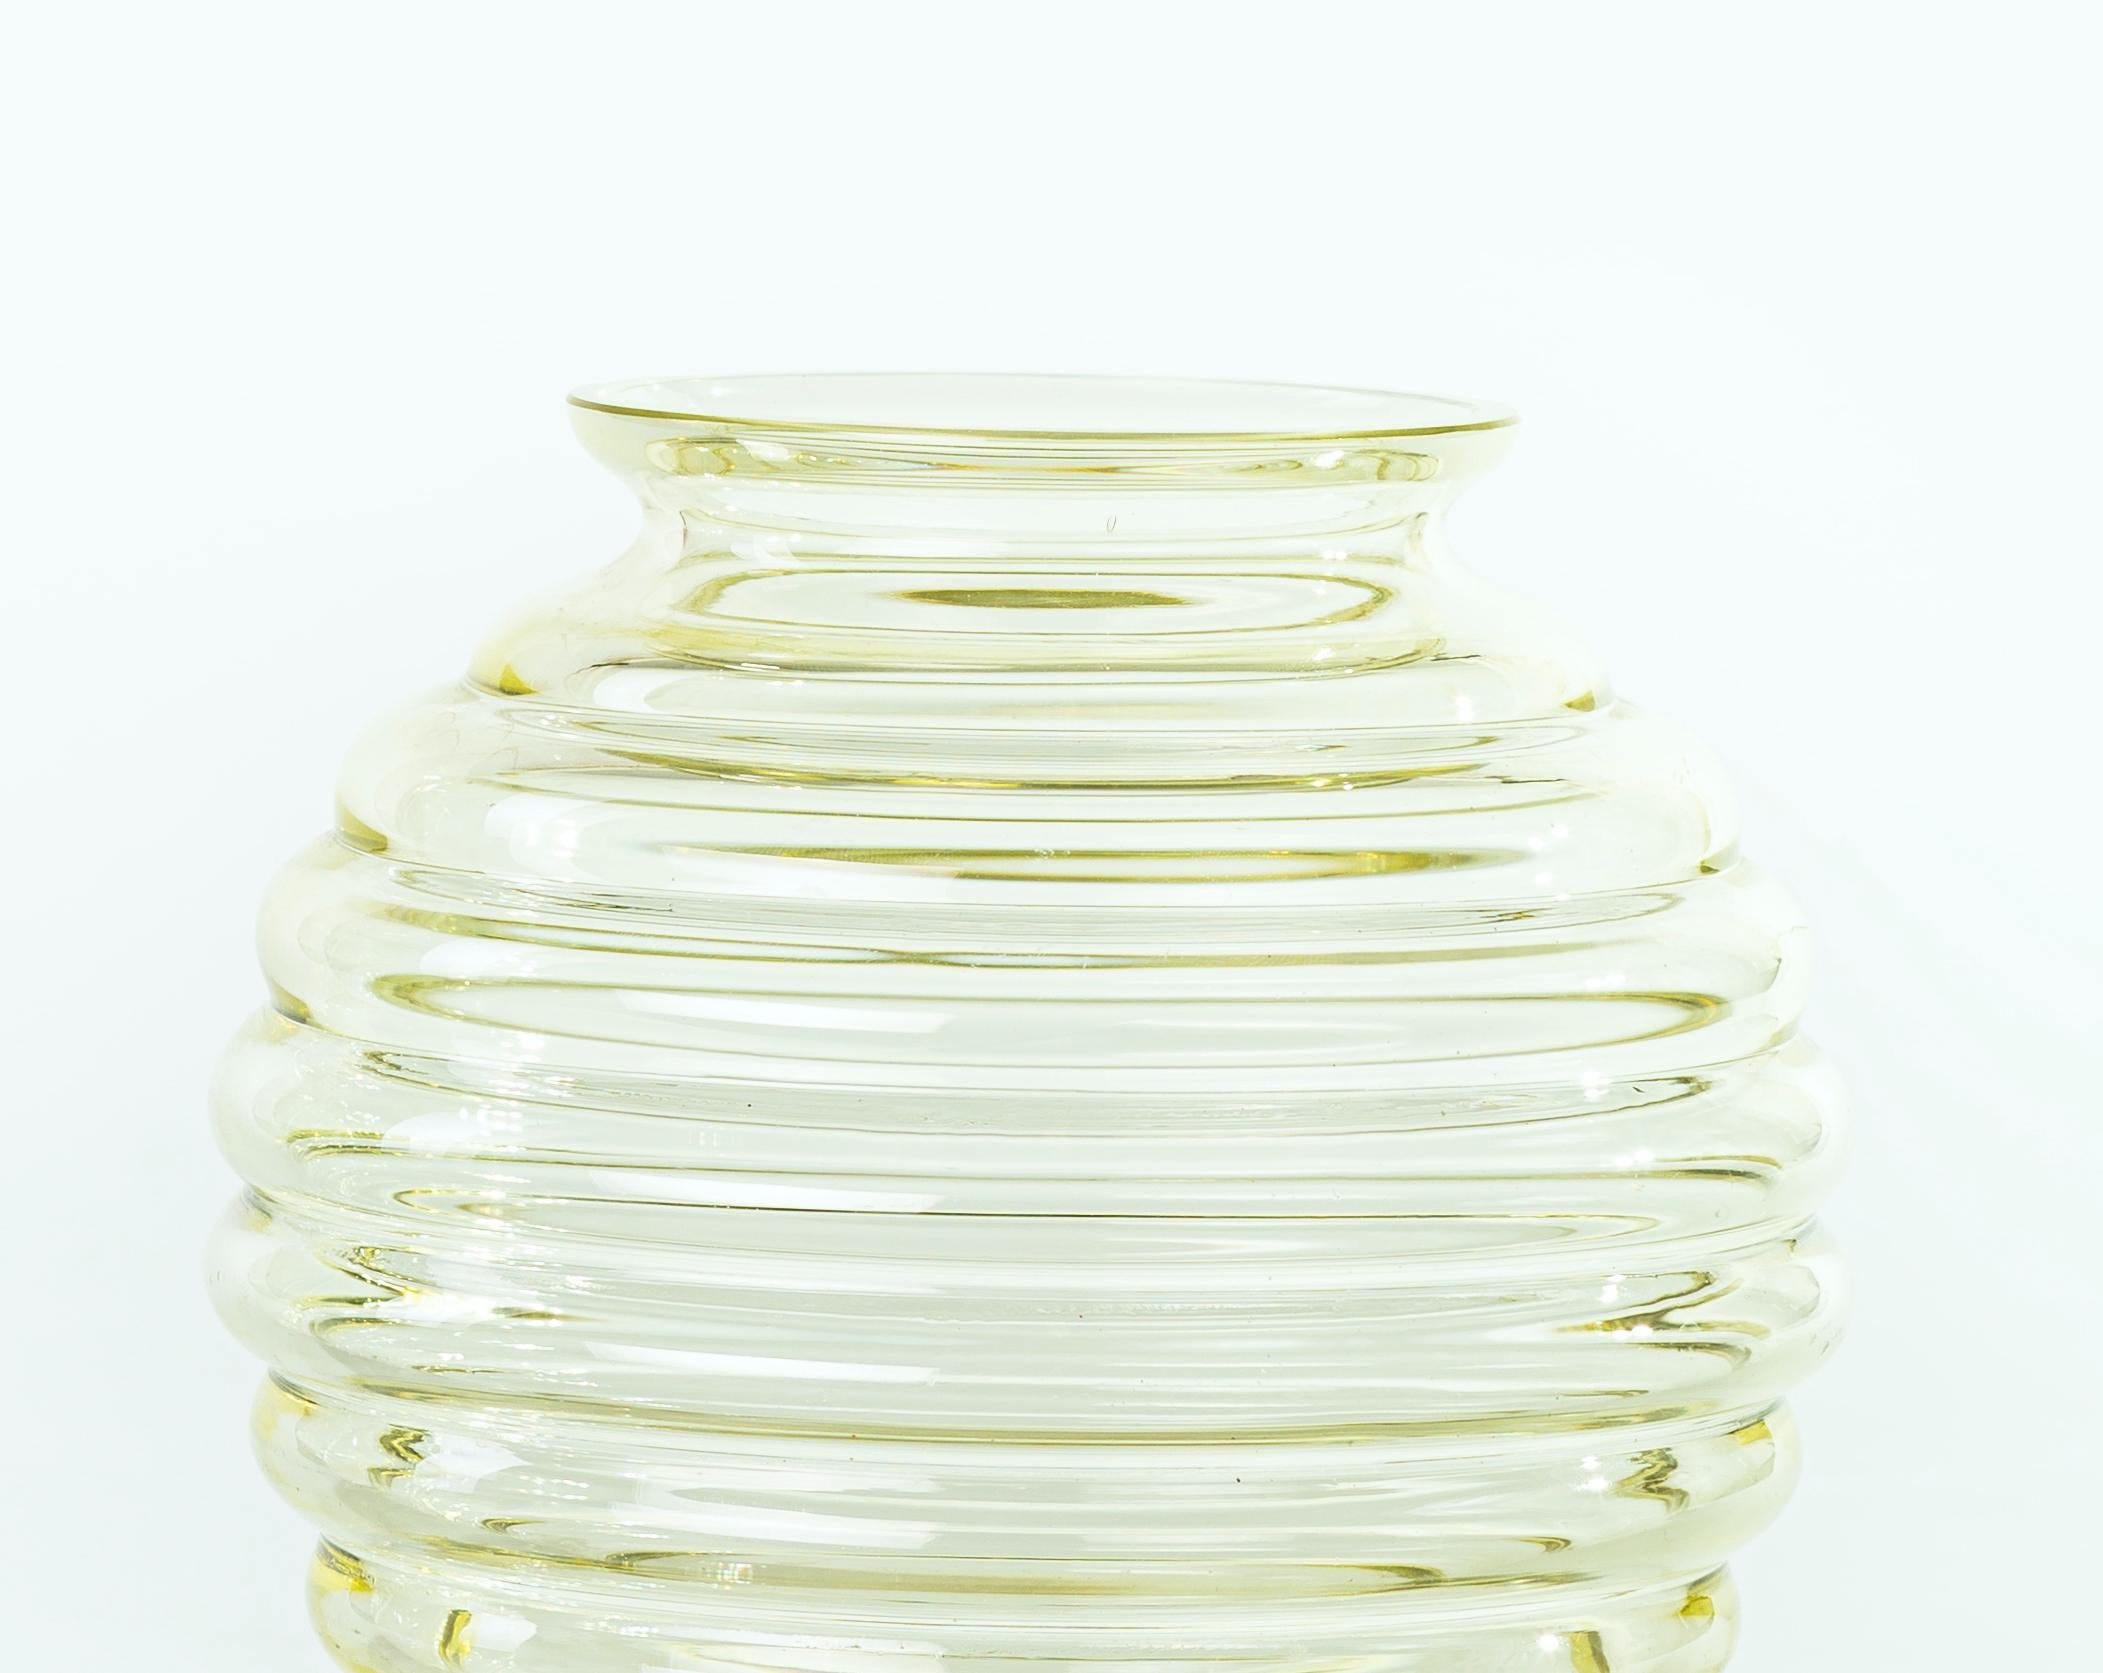 Circular vase is an original decorative object realized in Italy in the 1960s.

Beautiful little with bands detected in a yellowish glass.